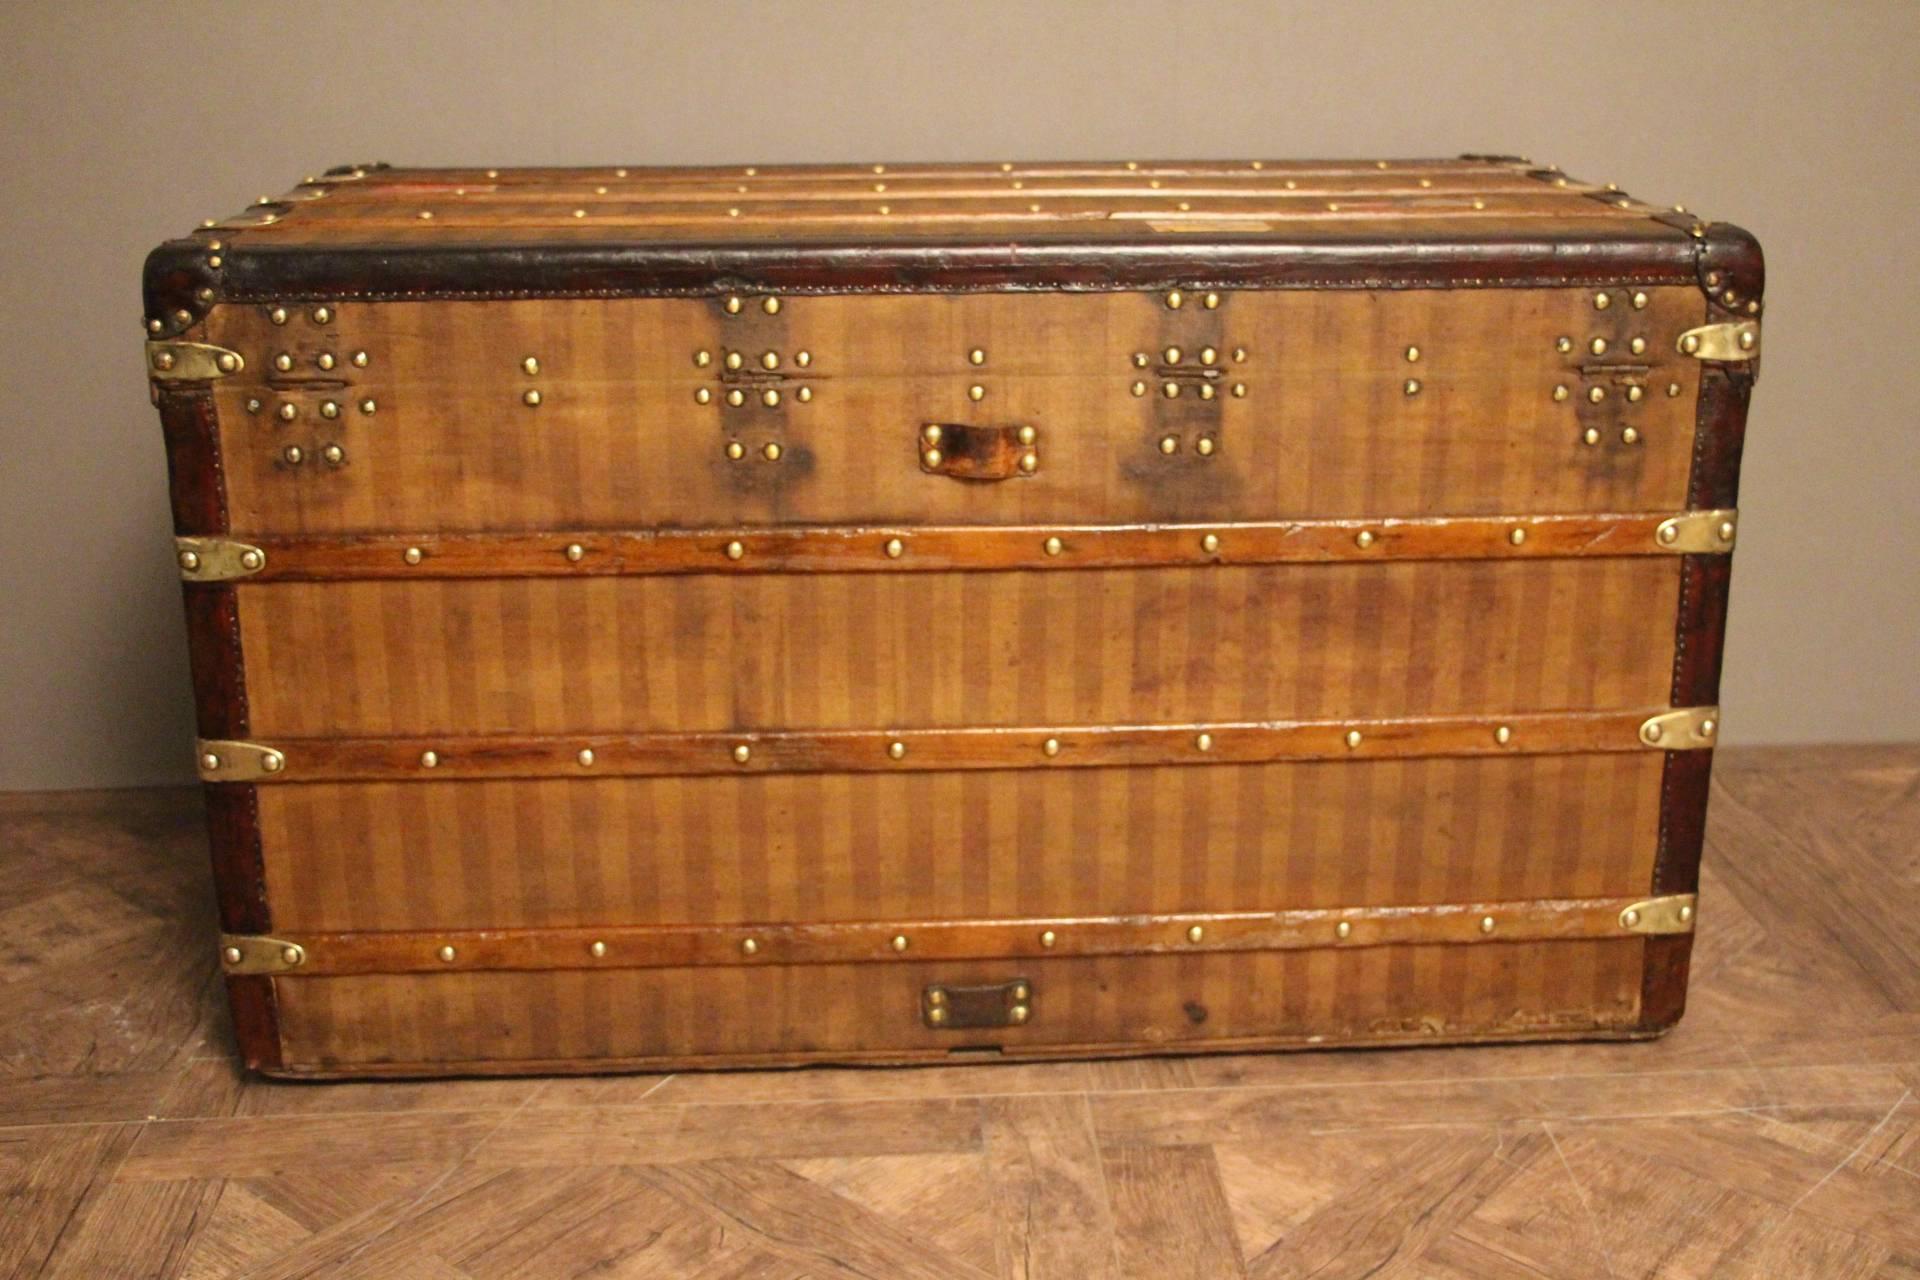 This Louis Vuitton steamer trunk, circa 1870s, features the striped 